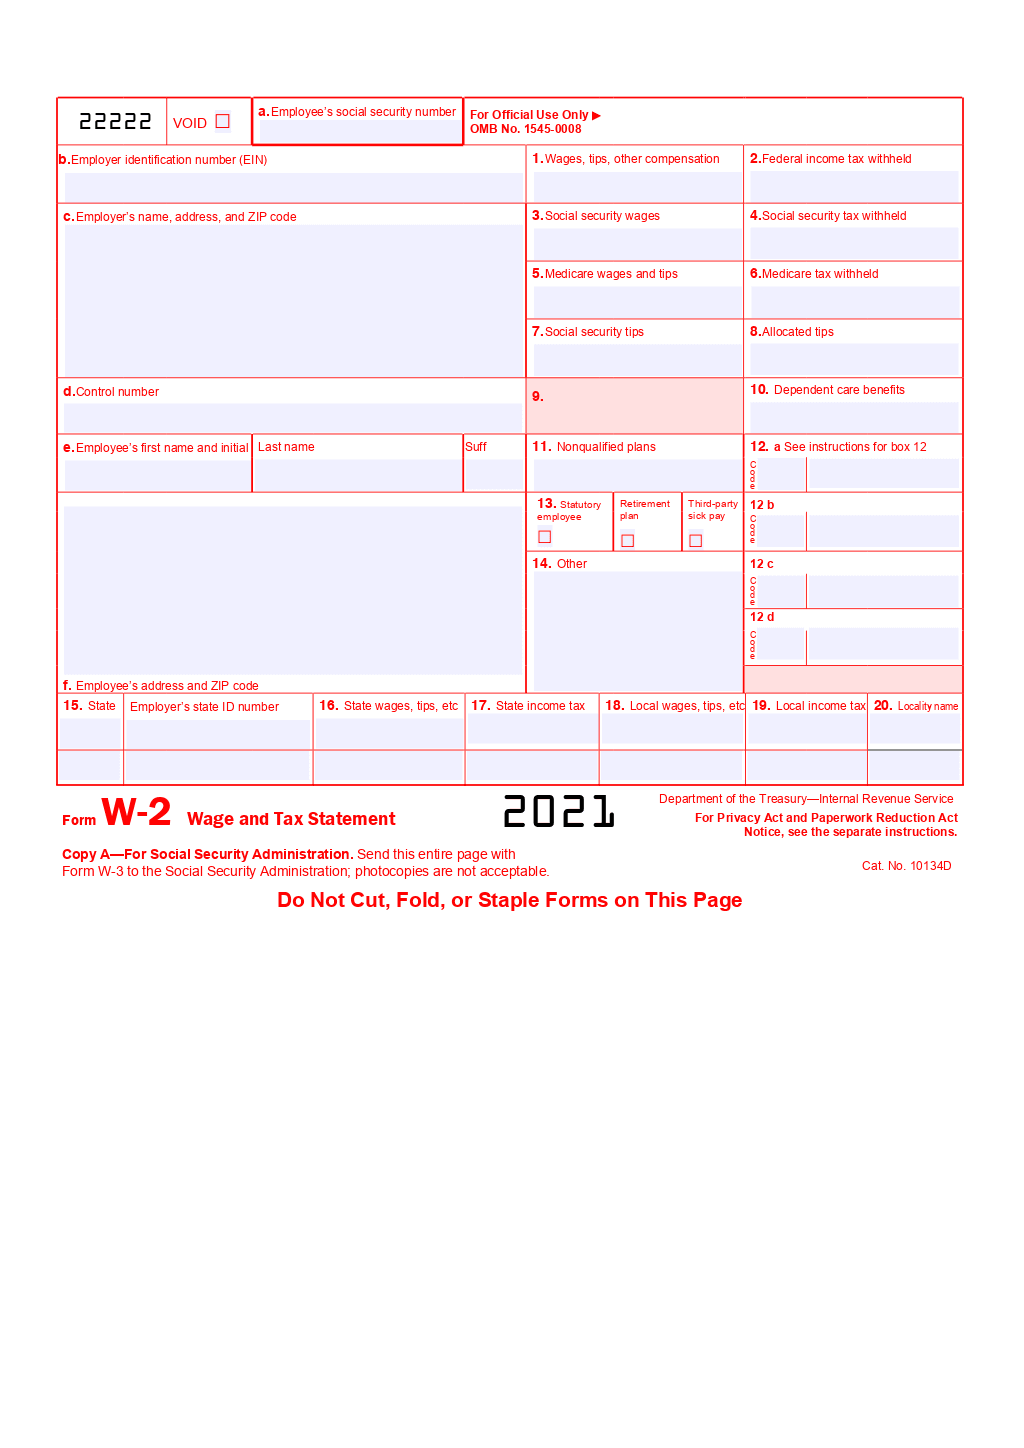 Form W-2 (Wage And Tax Statement) Template regarding Make A W2 Form Online Free